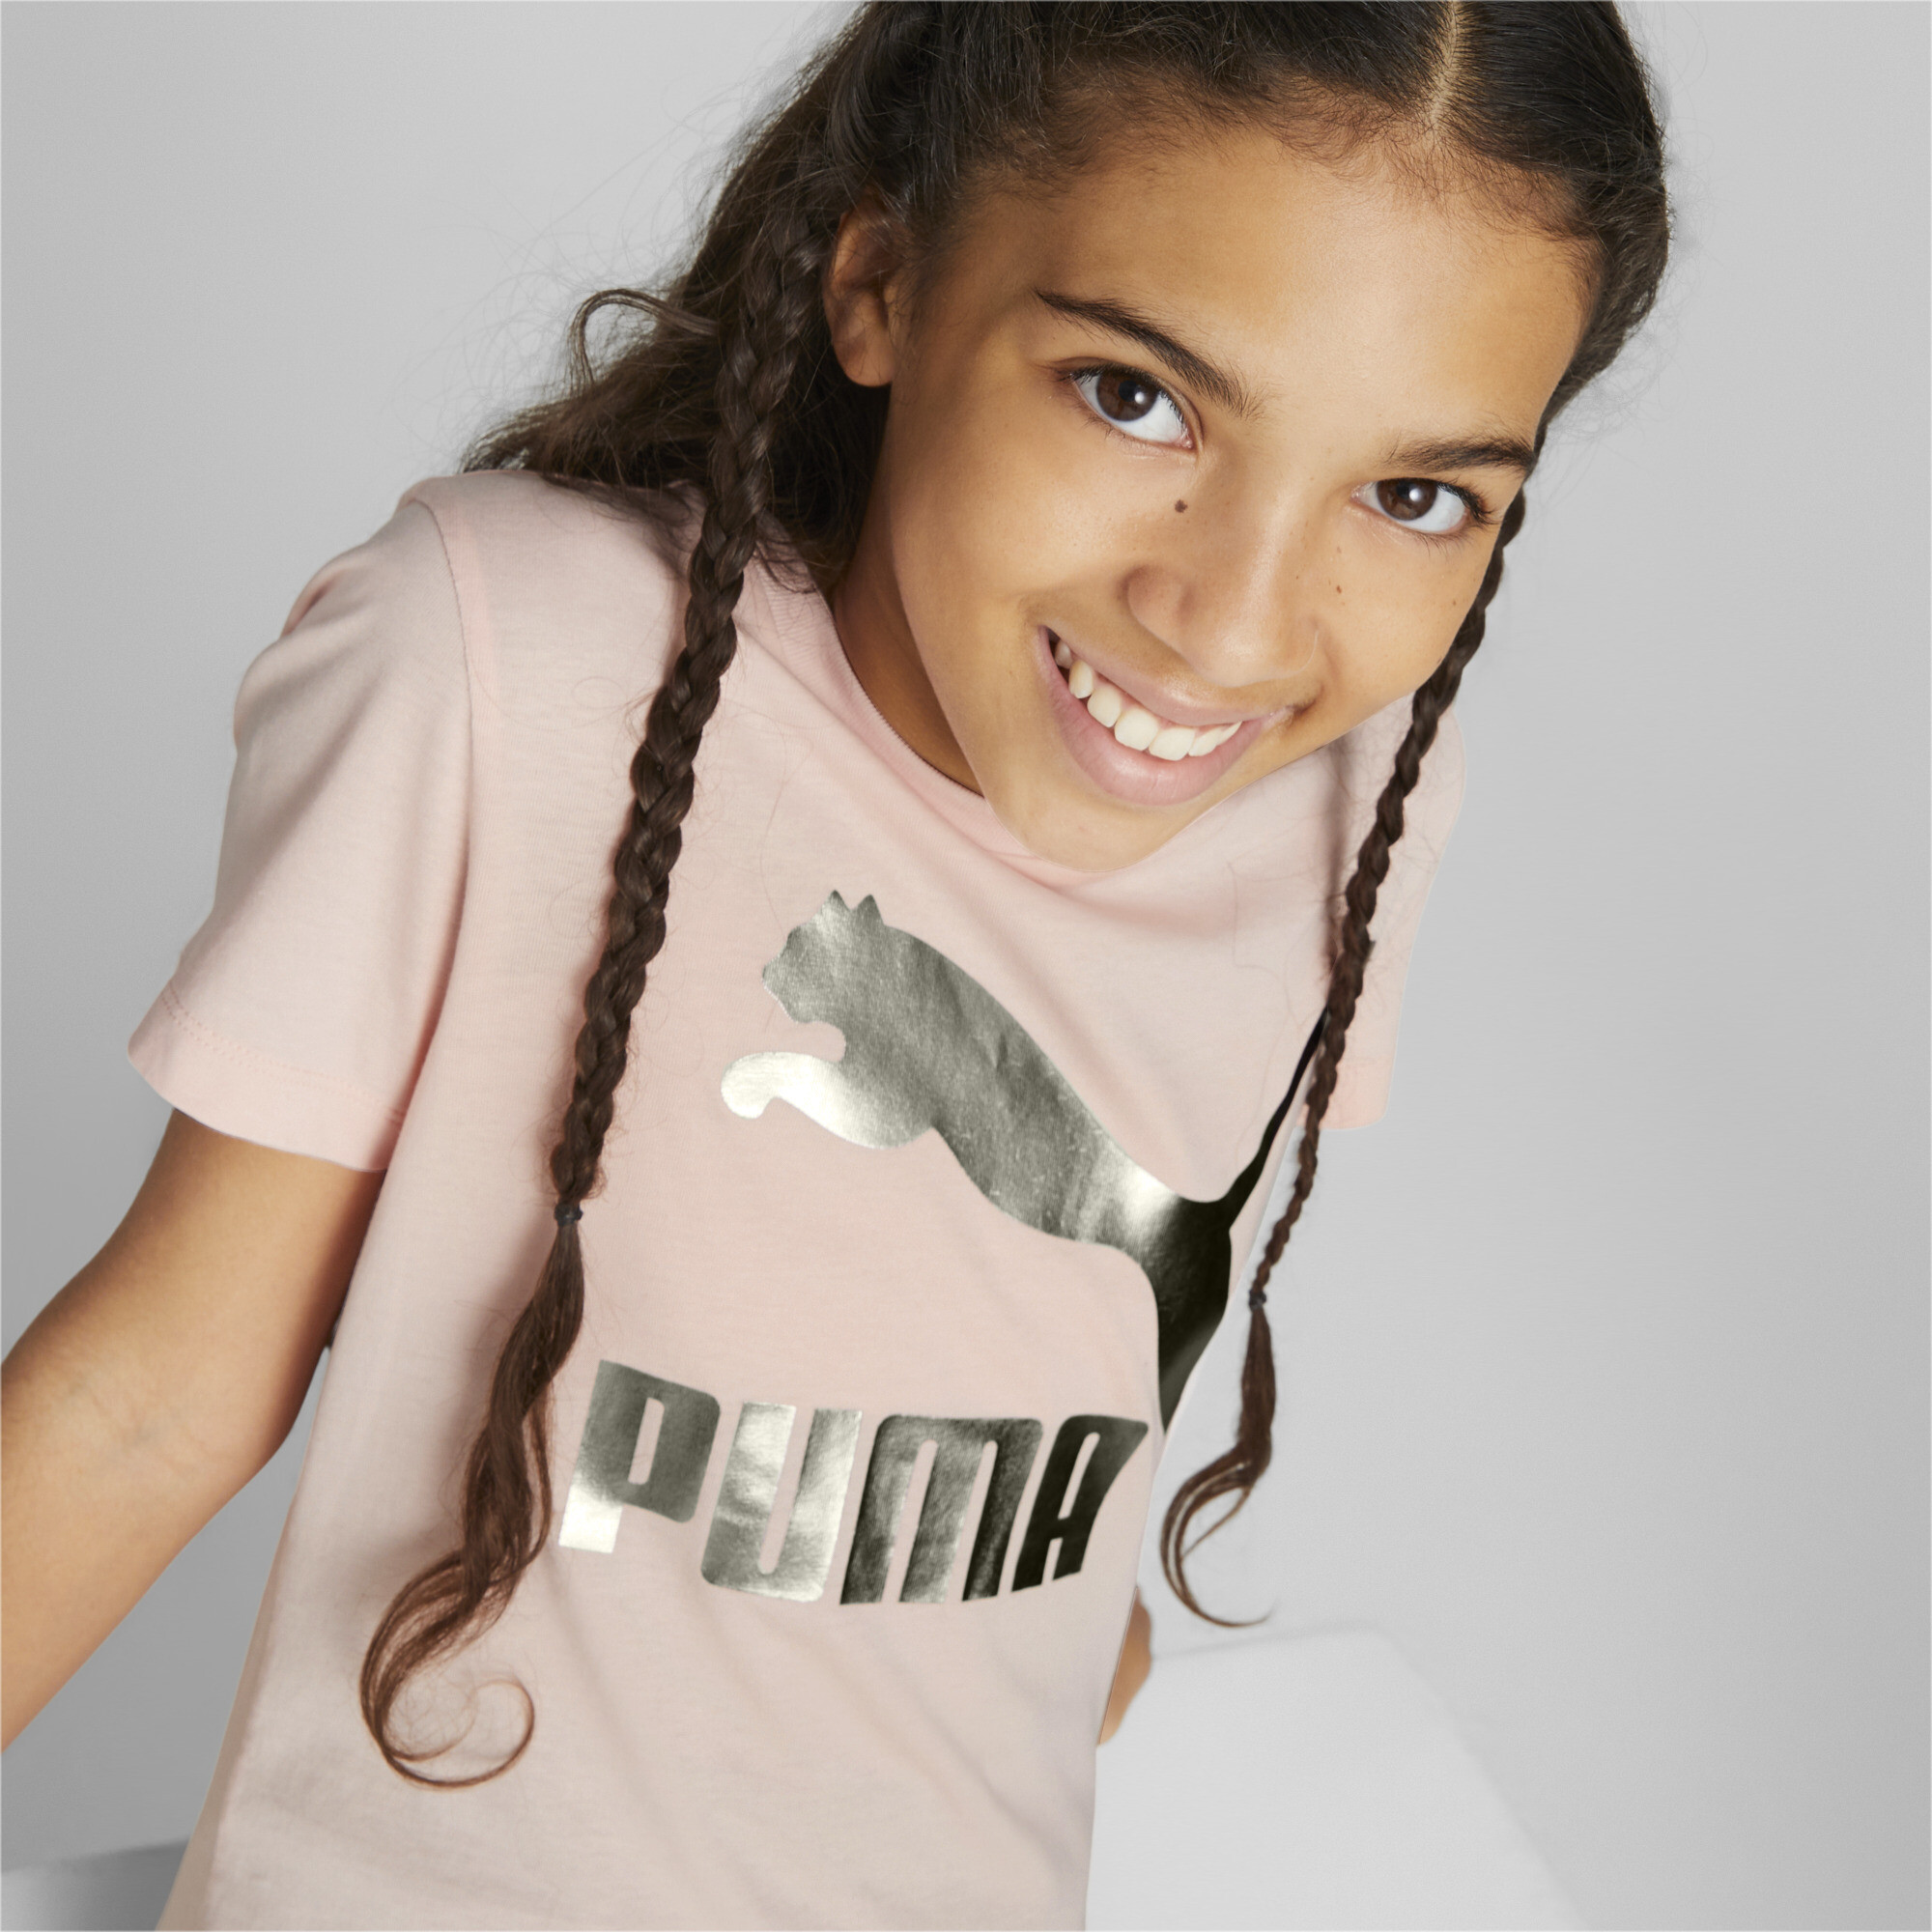 PUMA Classics Logo T-Shirt In Pink, Size 3-4 Youth